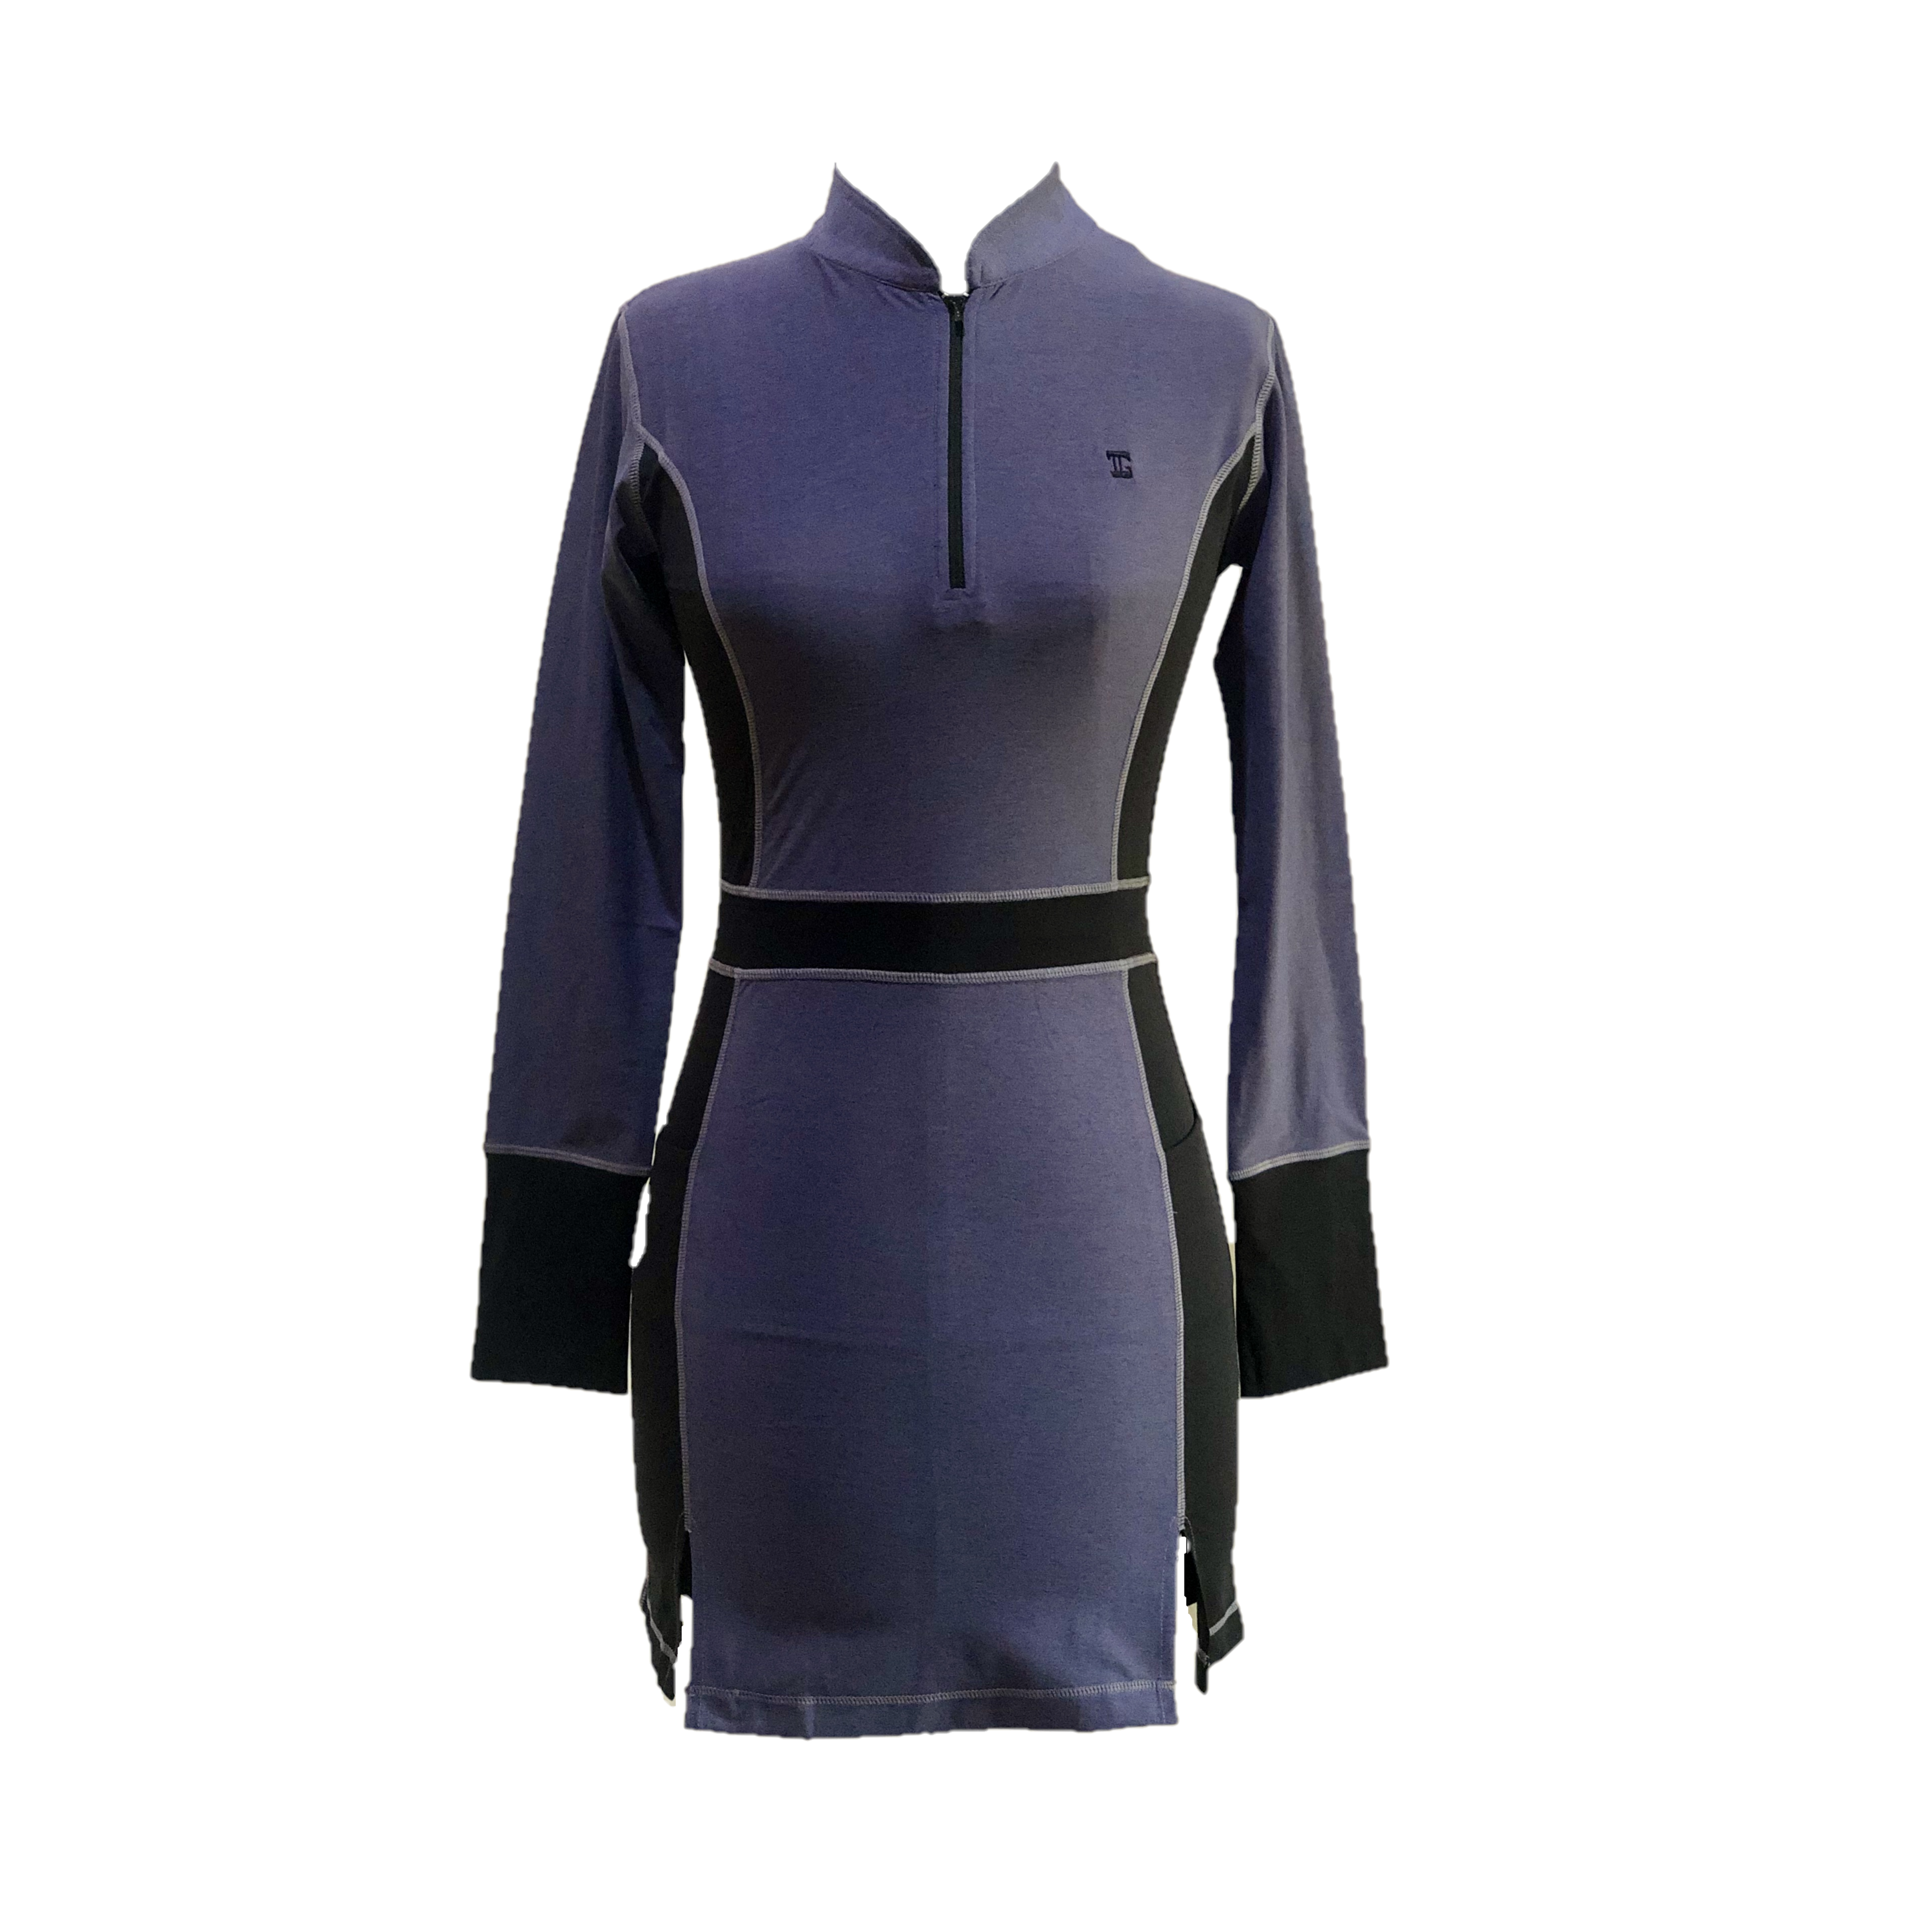 GD-016C || Golf Dress Long Sleeve Monalisa Blue With Black Half Belted Waist Cuff Belted Under Arm Side Panel Zipper Mandarin Type Collar With Peaked Back Section.